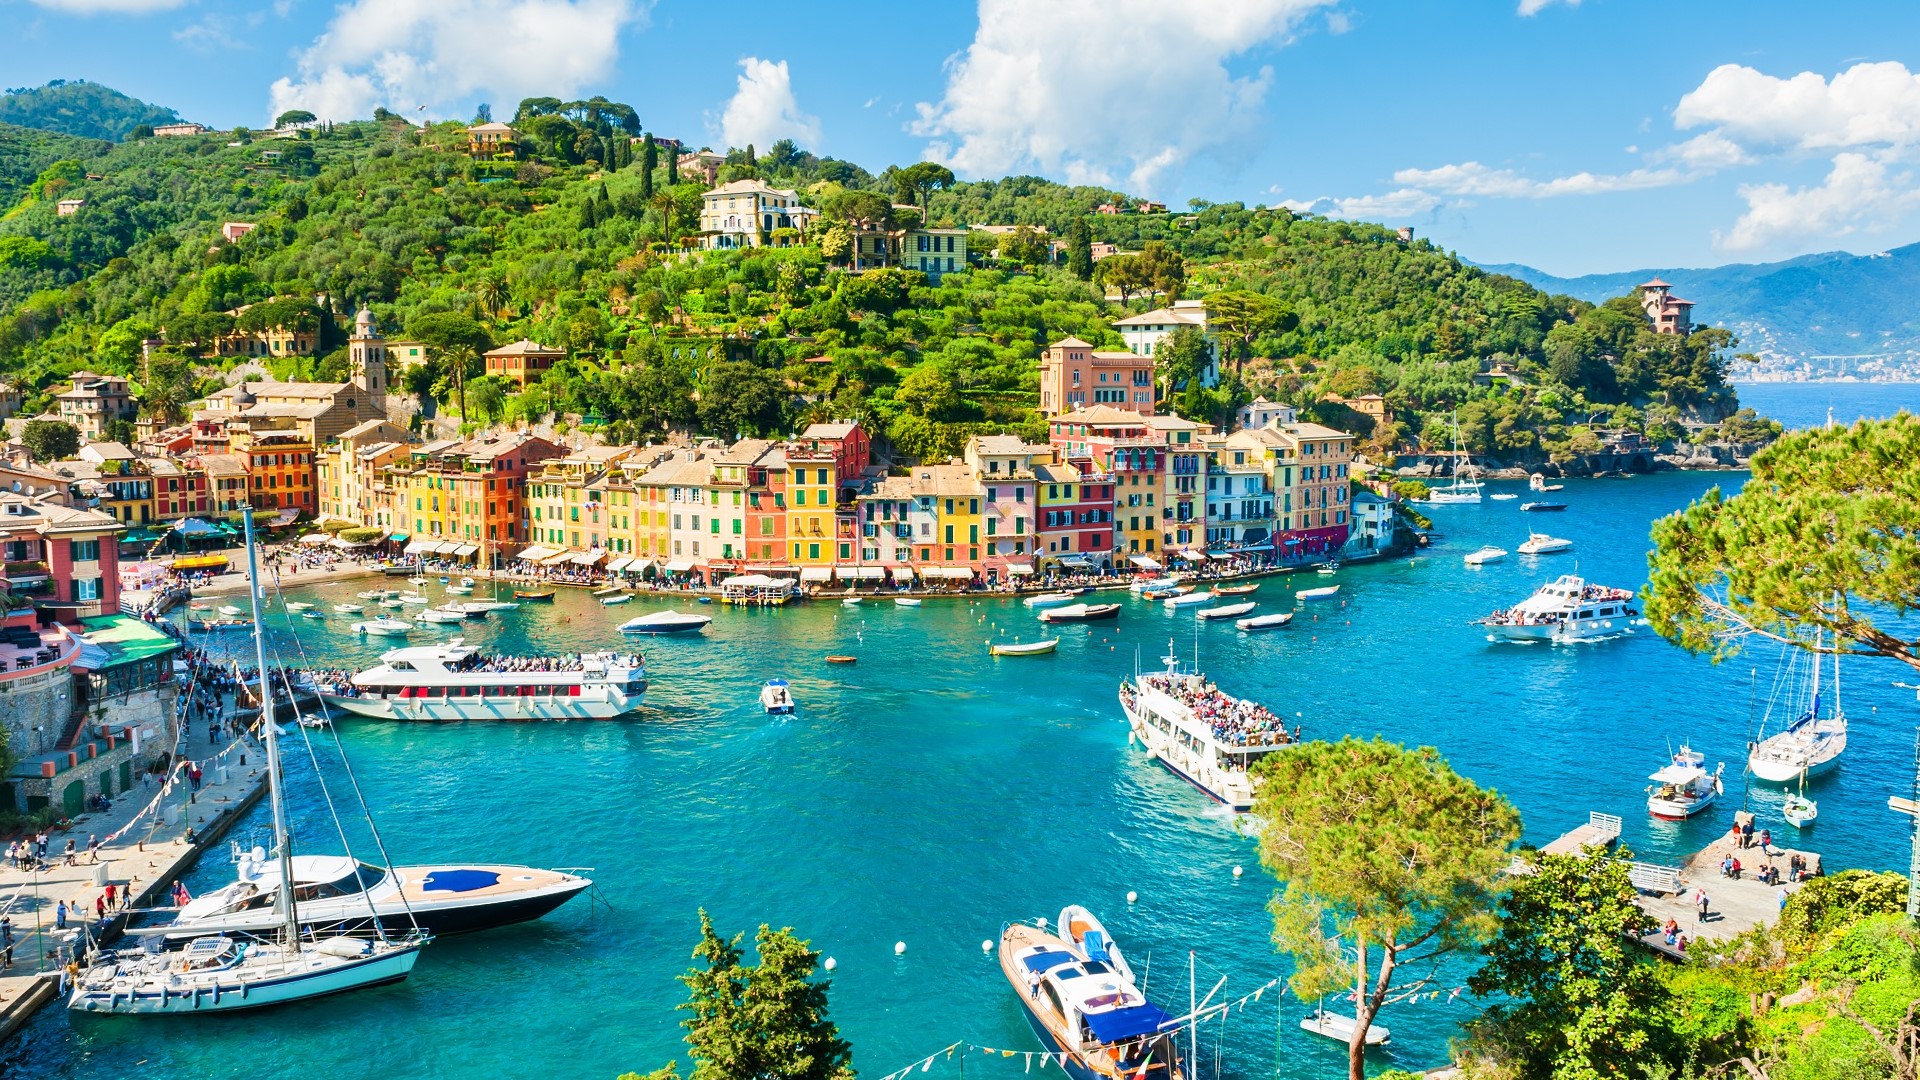 aerial view of boats and waterfront buildings around a harbor in Portofino, Italy